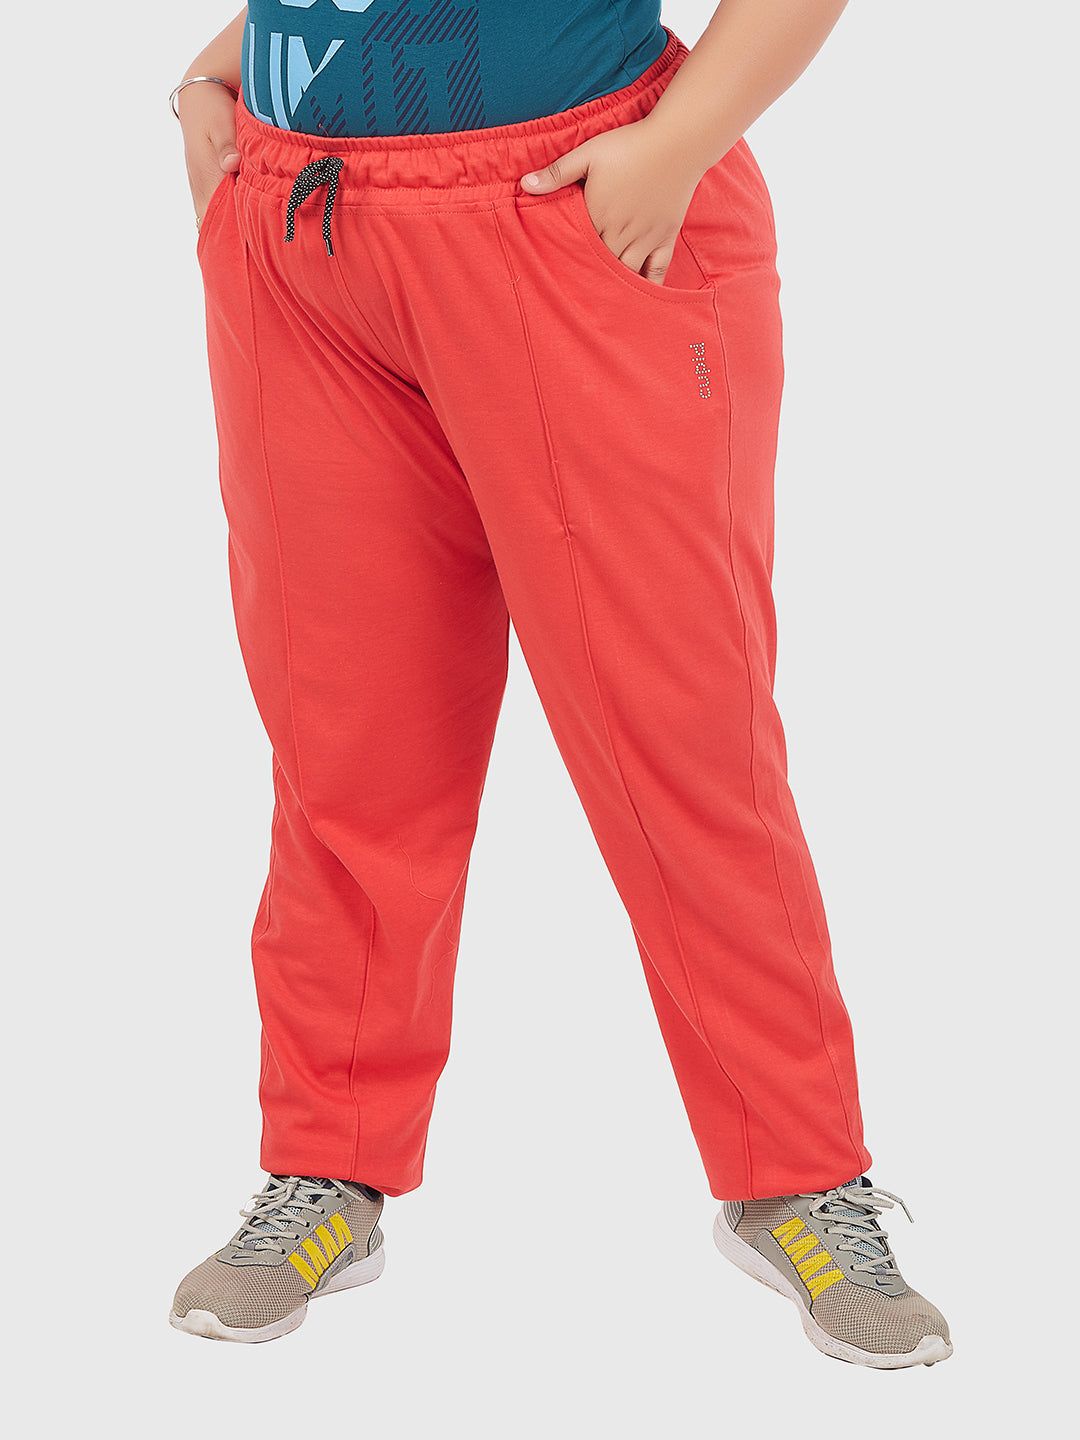 Cotton Track Pants - Relaxed Fit Lounge Pants - Coral Red